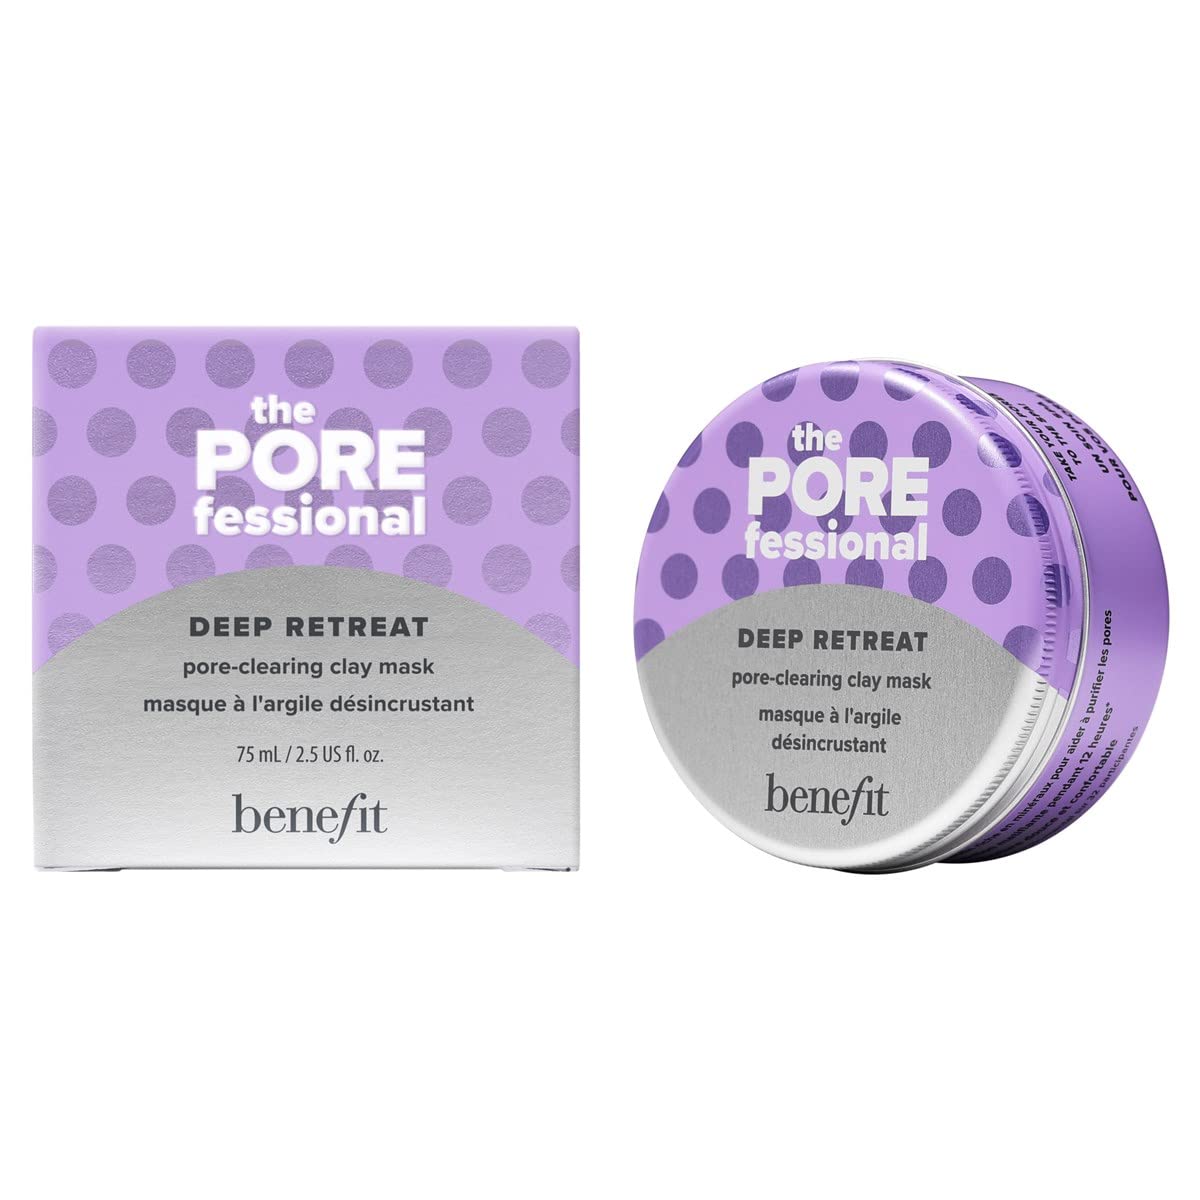 Benefit COSMETICS The POREfessional Deep Retreat Pore-Clearing Kaolin Clay Mask 2.5 oz / 75 mL